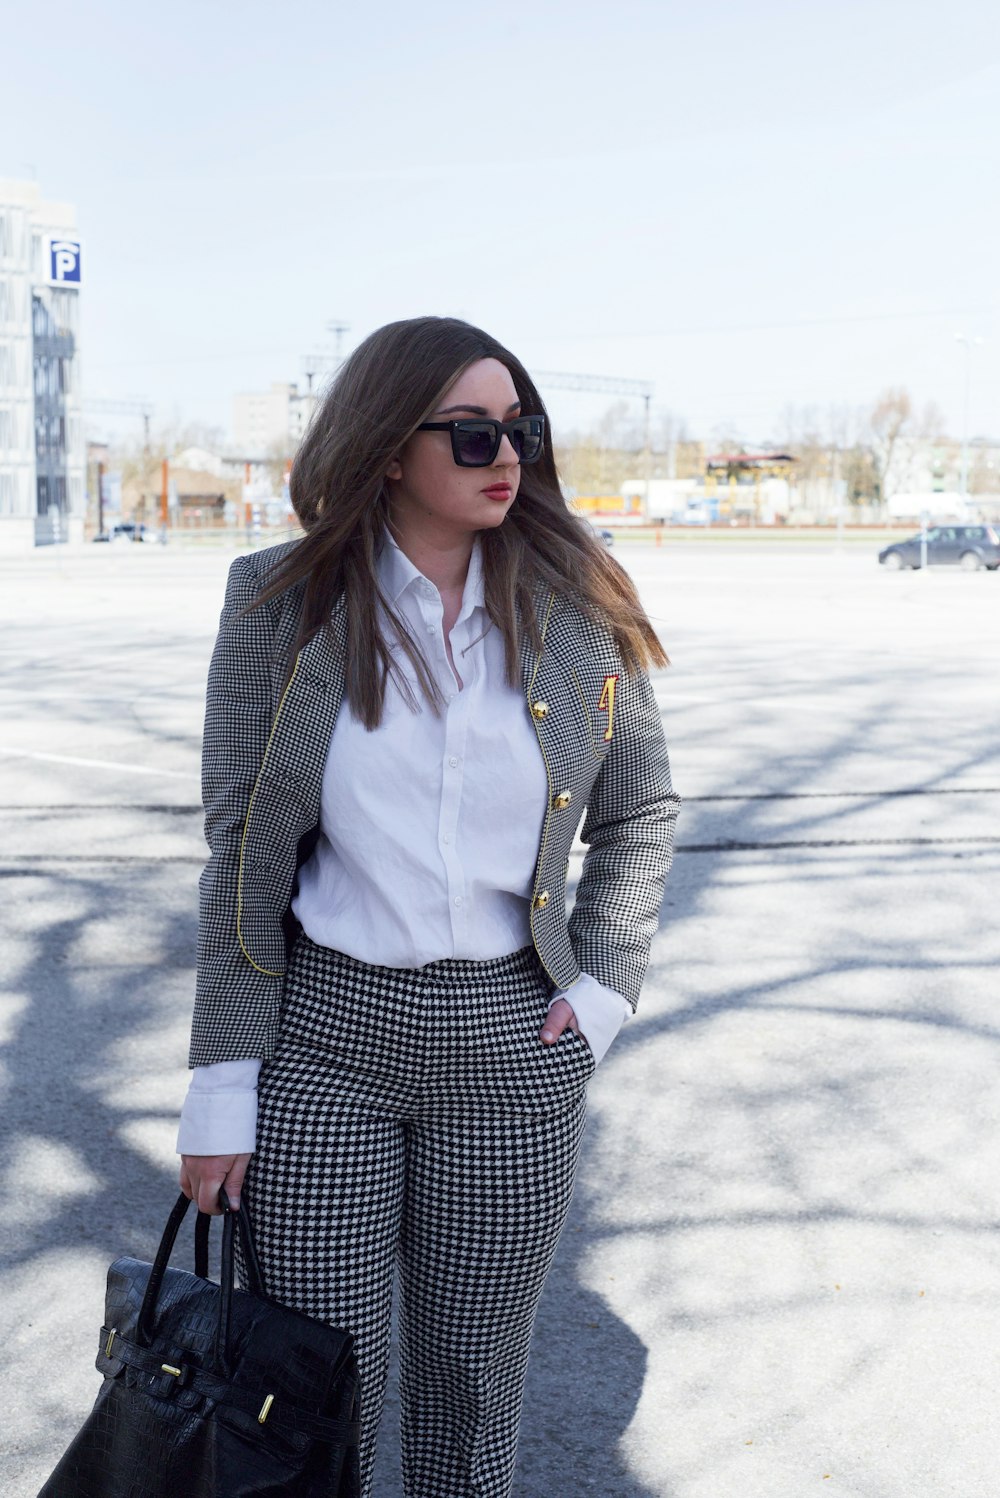 woman in black and white checkered blazer wearing black sunglasses standing on gray concrete floor during